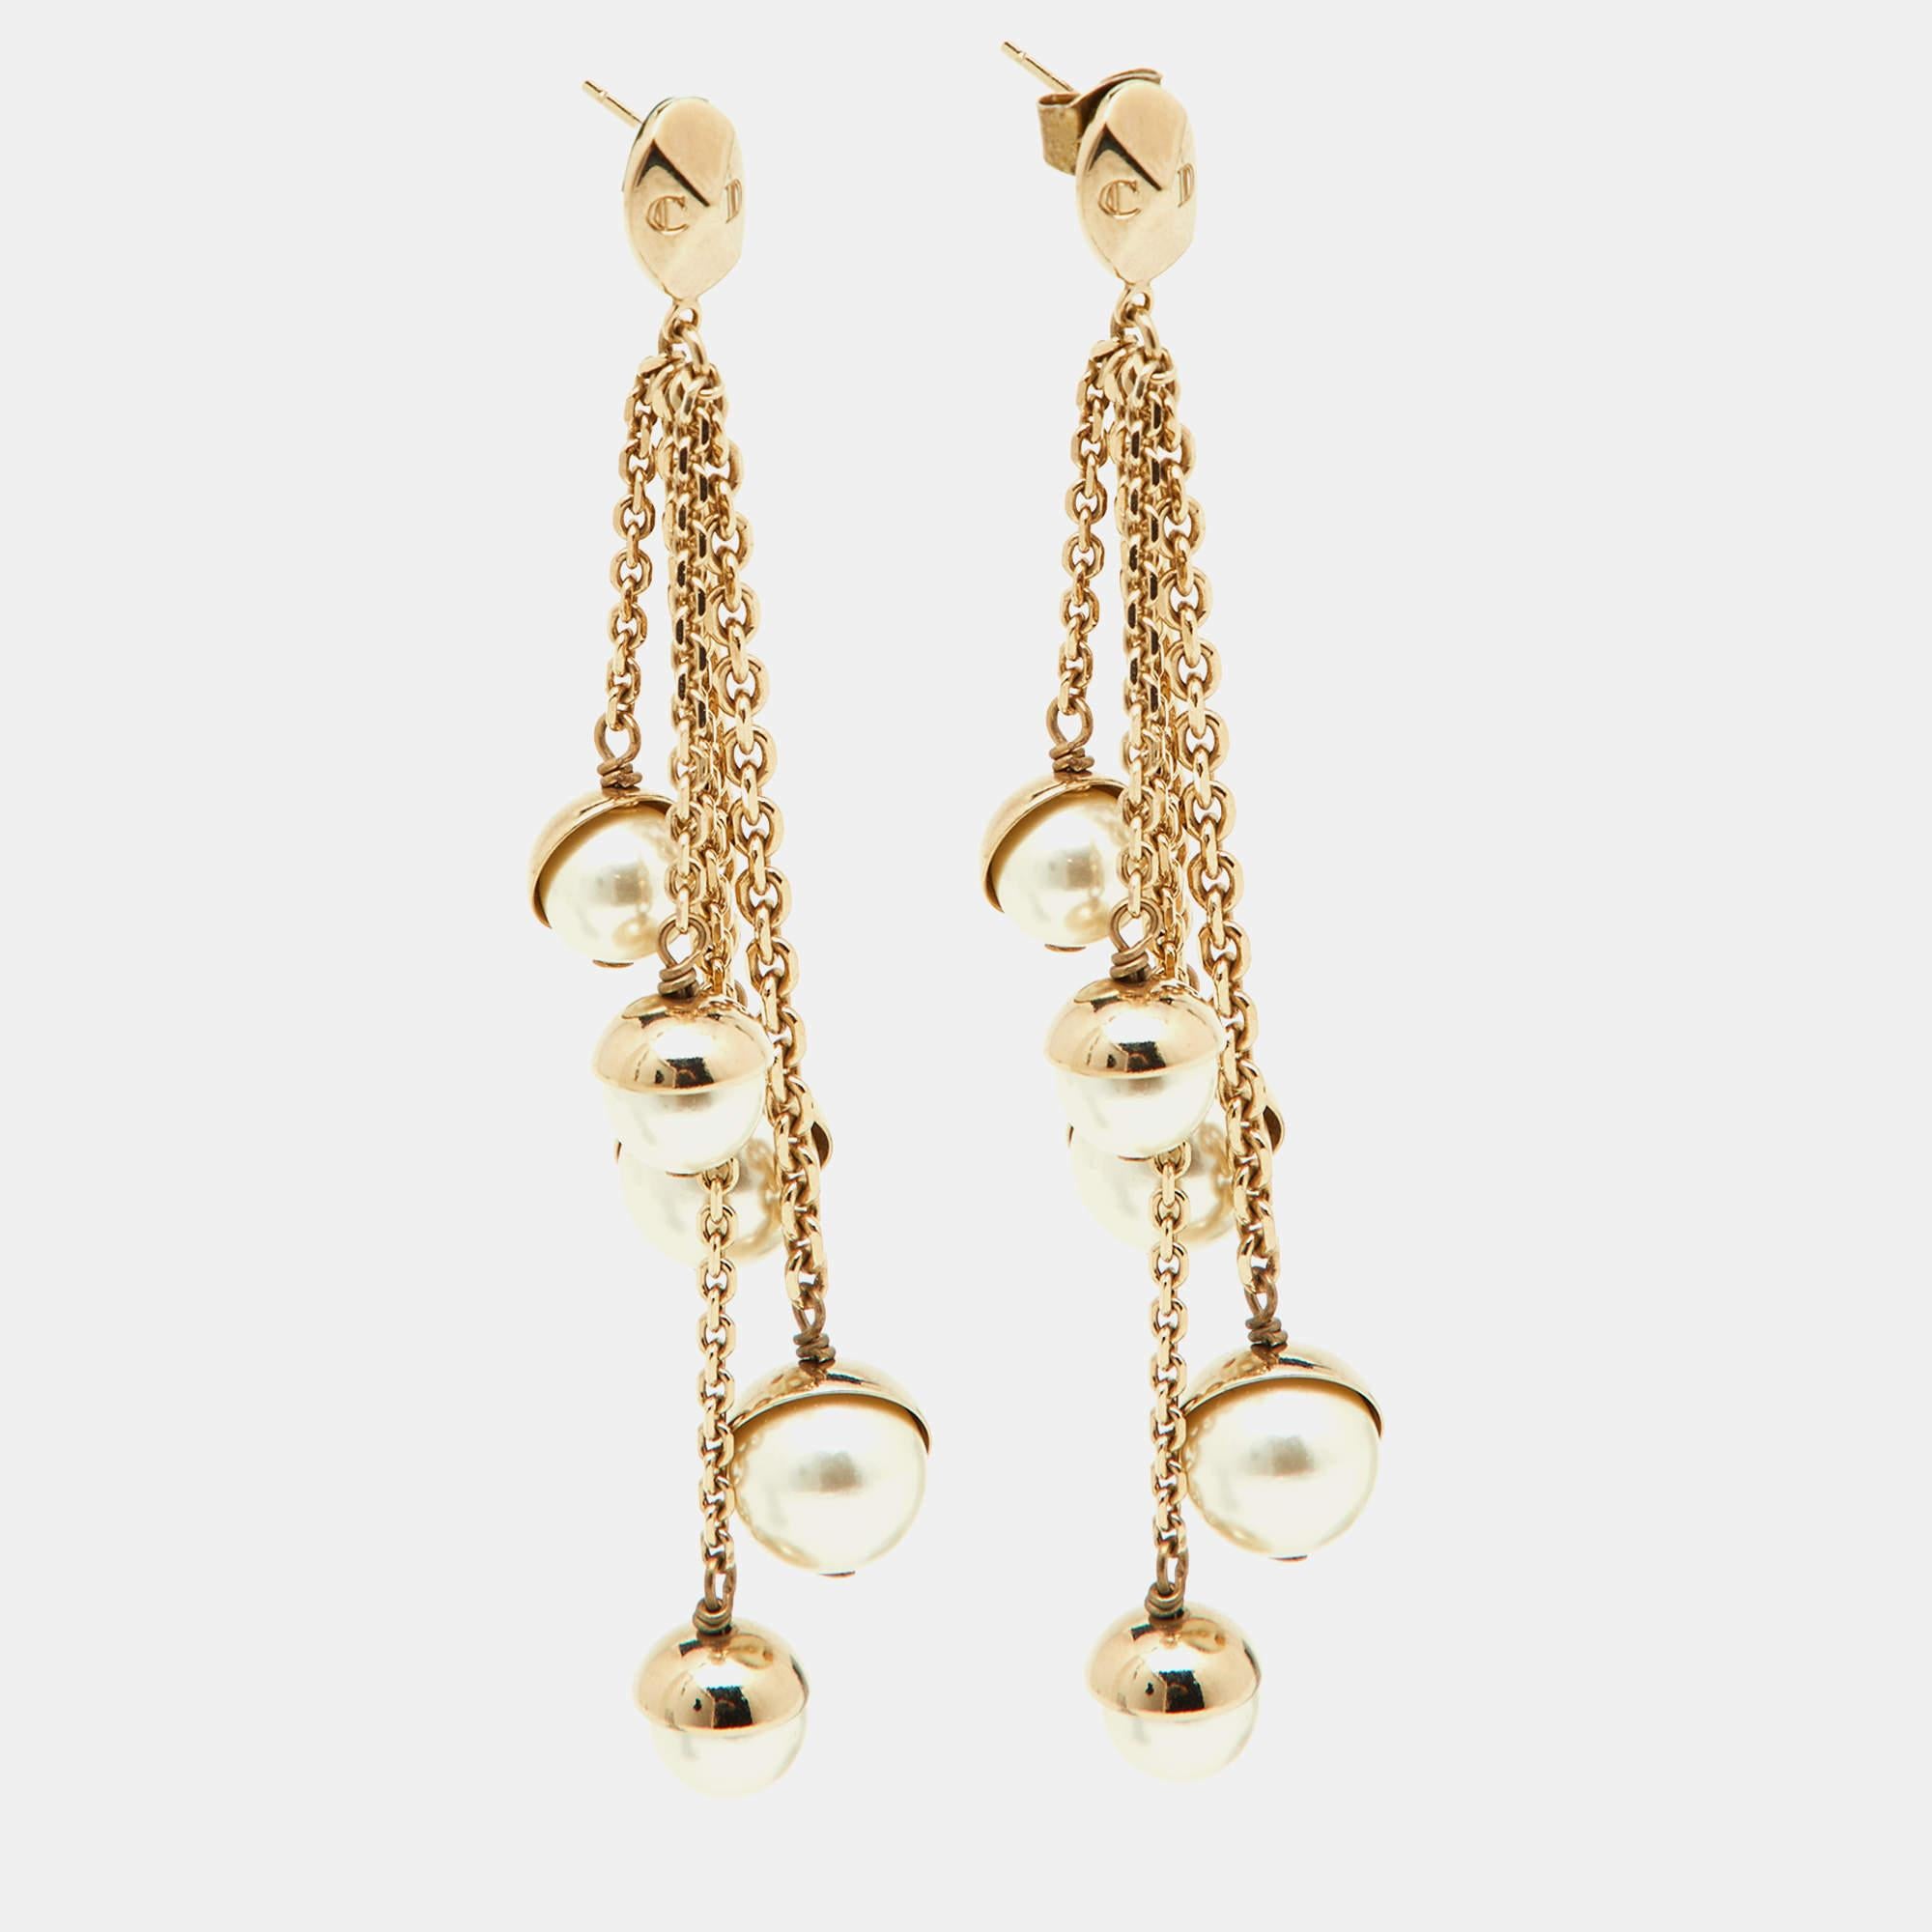 This pair of Dior drop earrings is an accessory you would go to season after season. Made of gold-tone metal with faux pearl tips, this one's a worthy investment.

